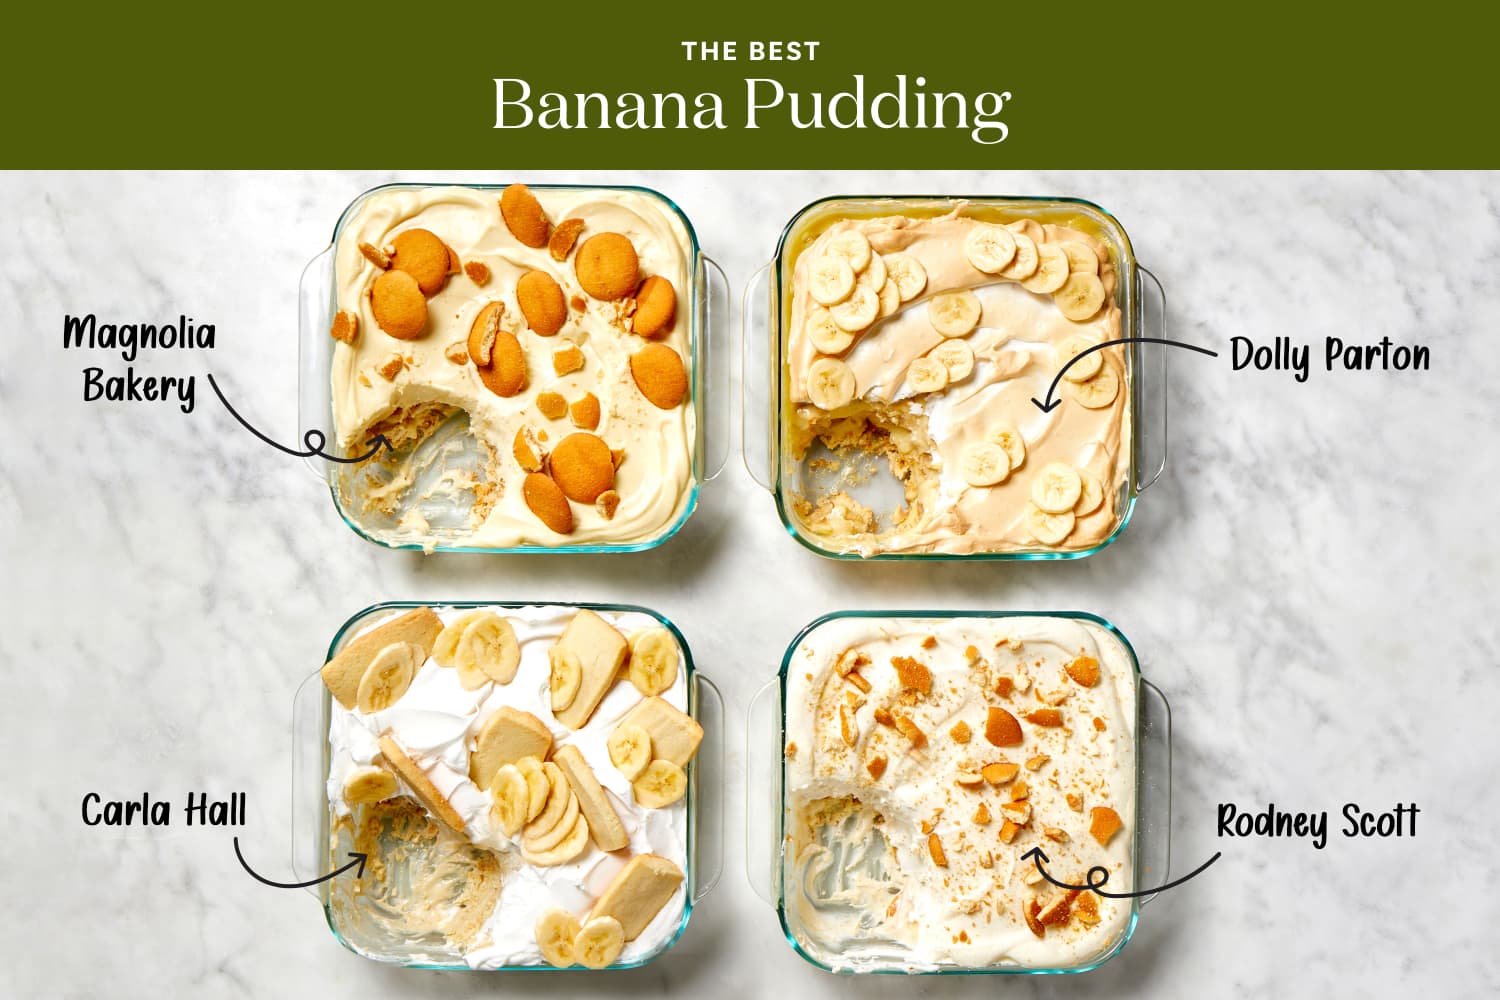 The Best Banana Pudding Recipe (We Tested 4 Top Contenders!)